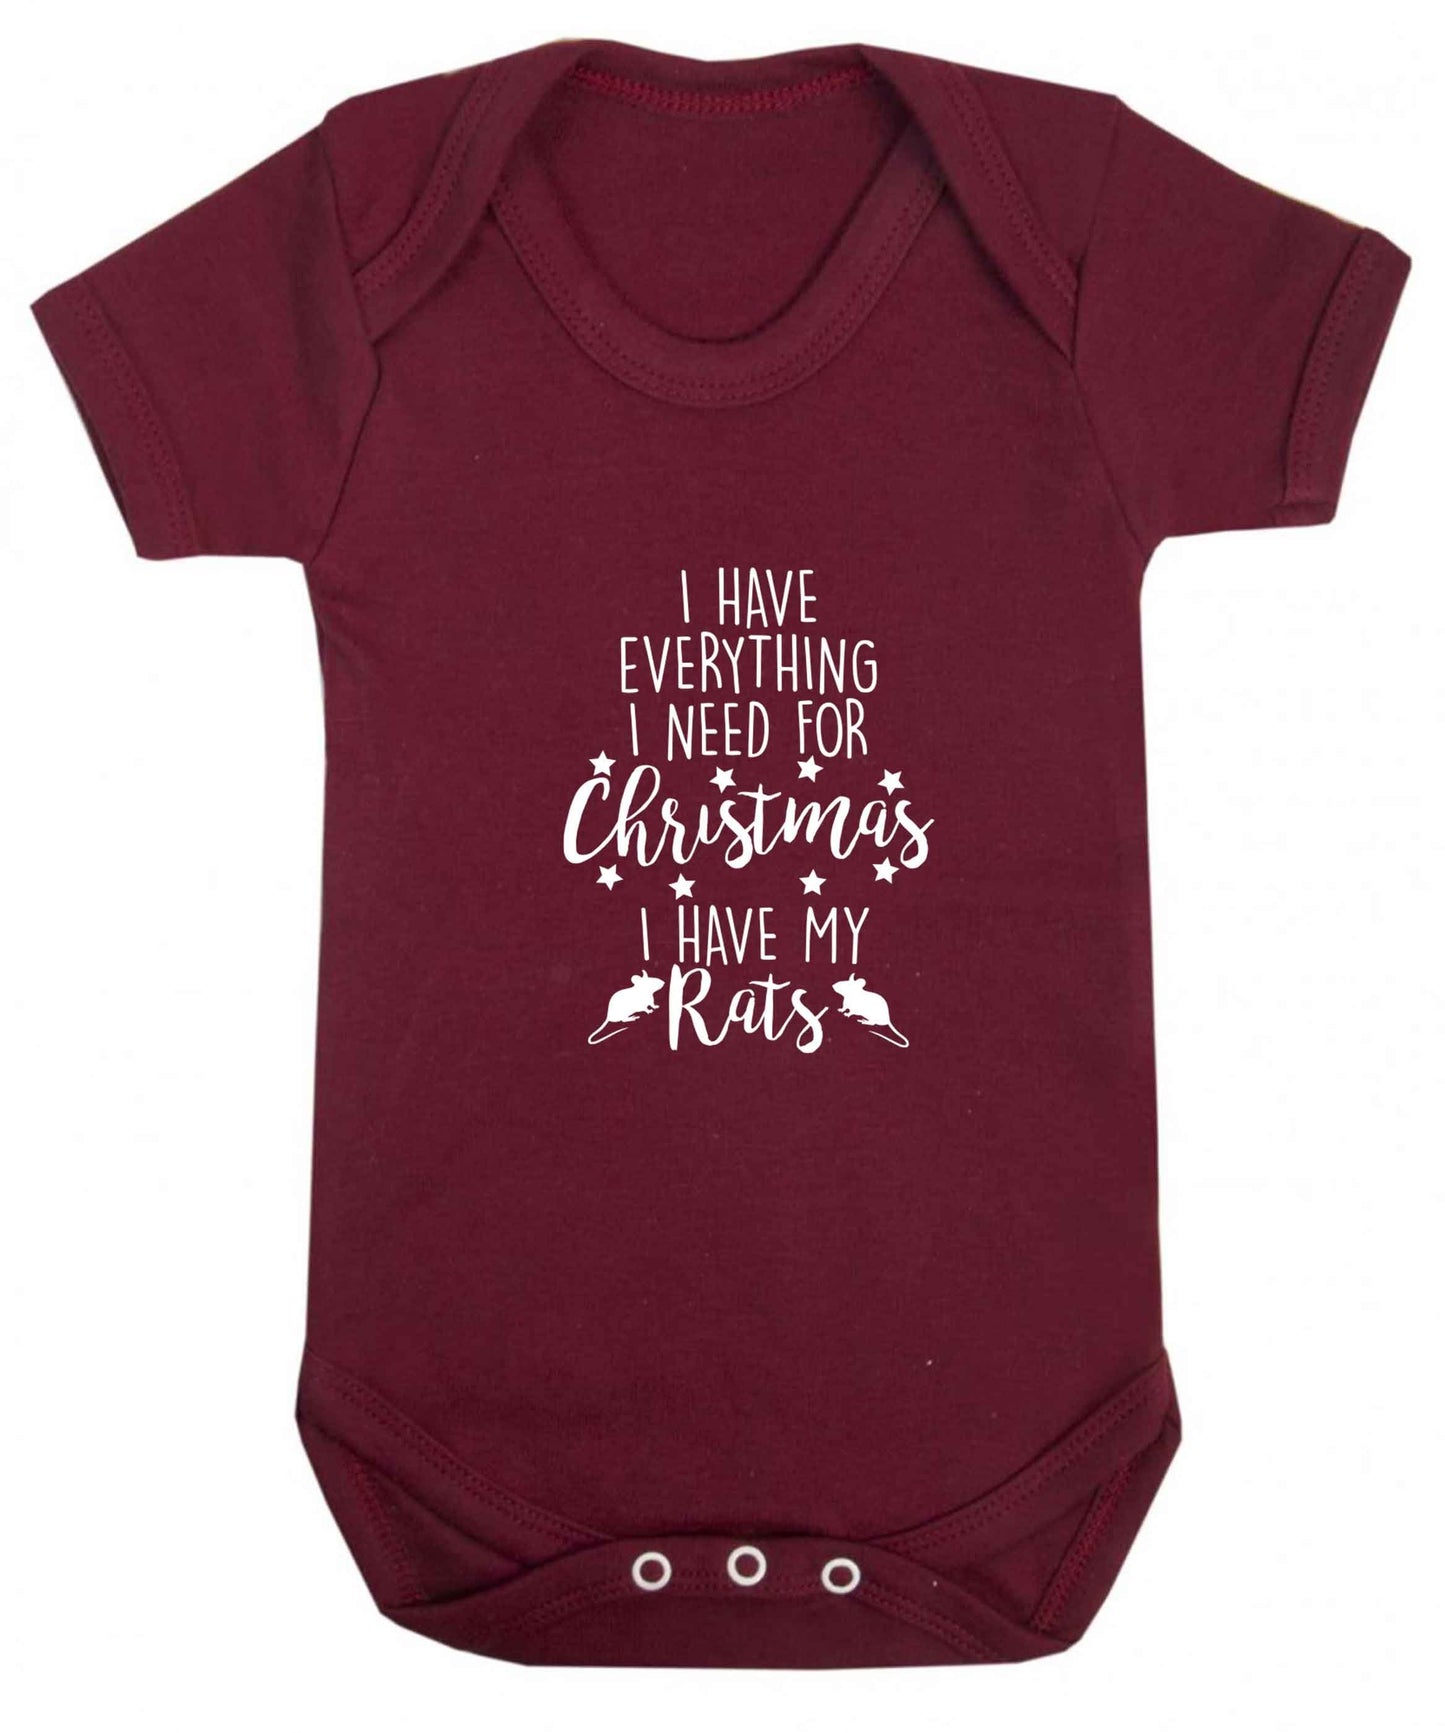 I have everything I need for Christmas I have my rats baby vest maroon 18-24 months